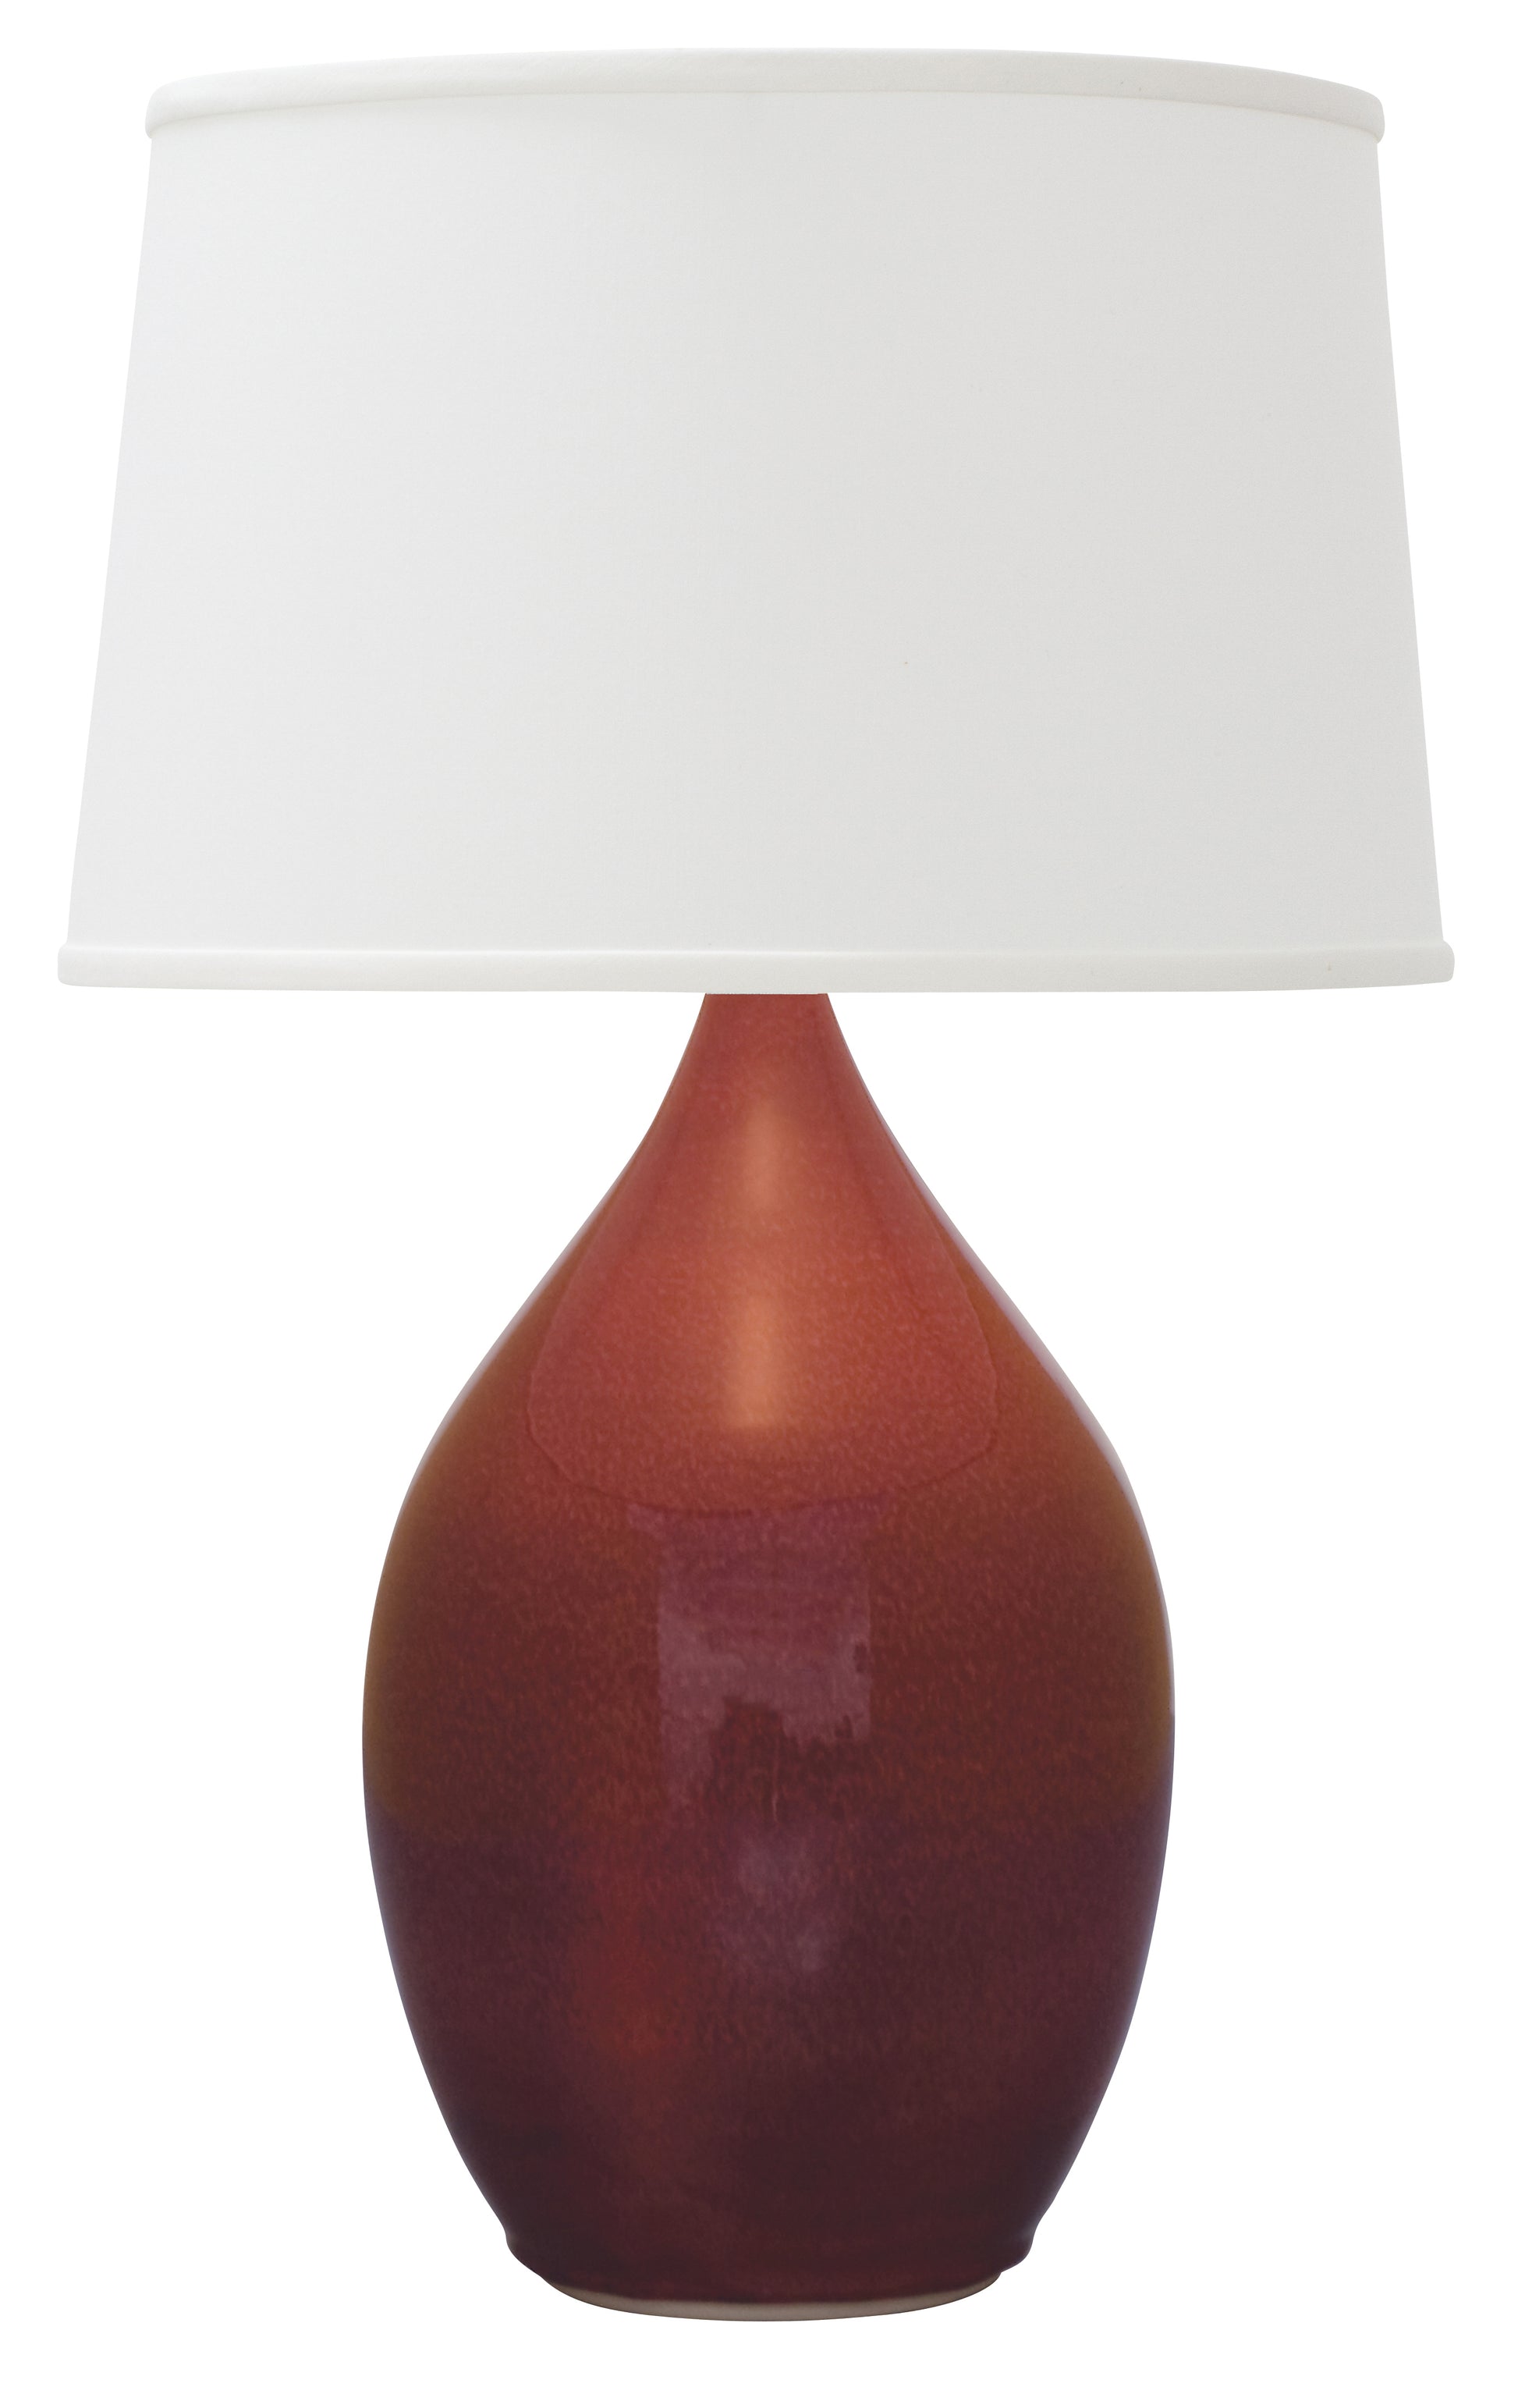 House of Troy Scatchard 18.5" Stoneware Table Lamp in Copper Red GS202-CR